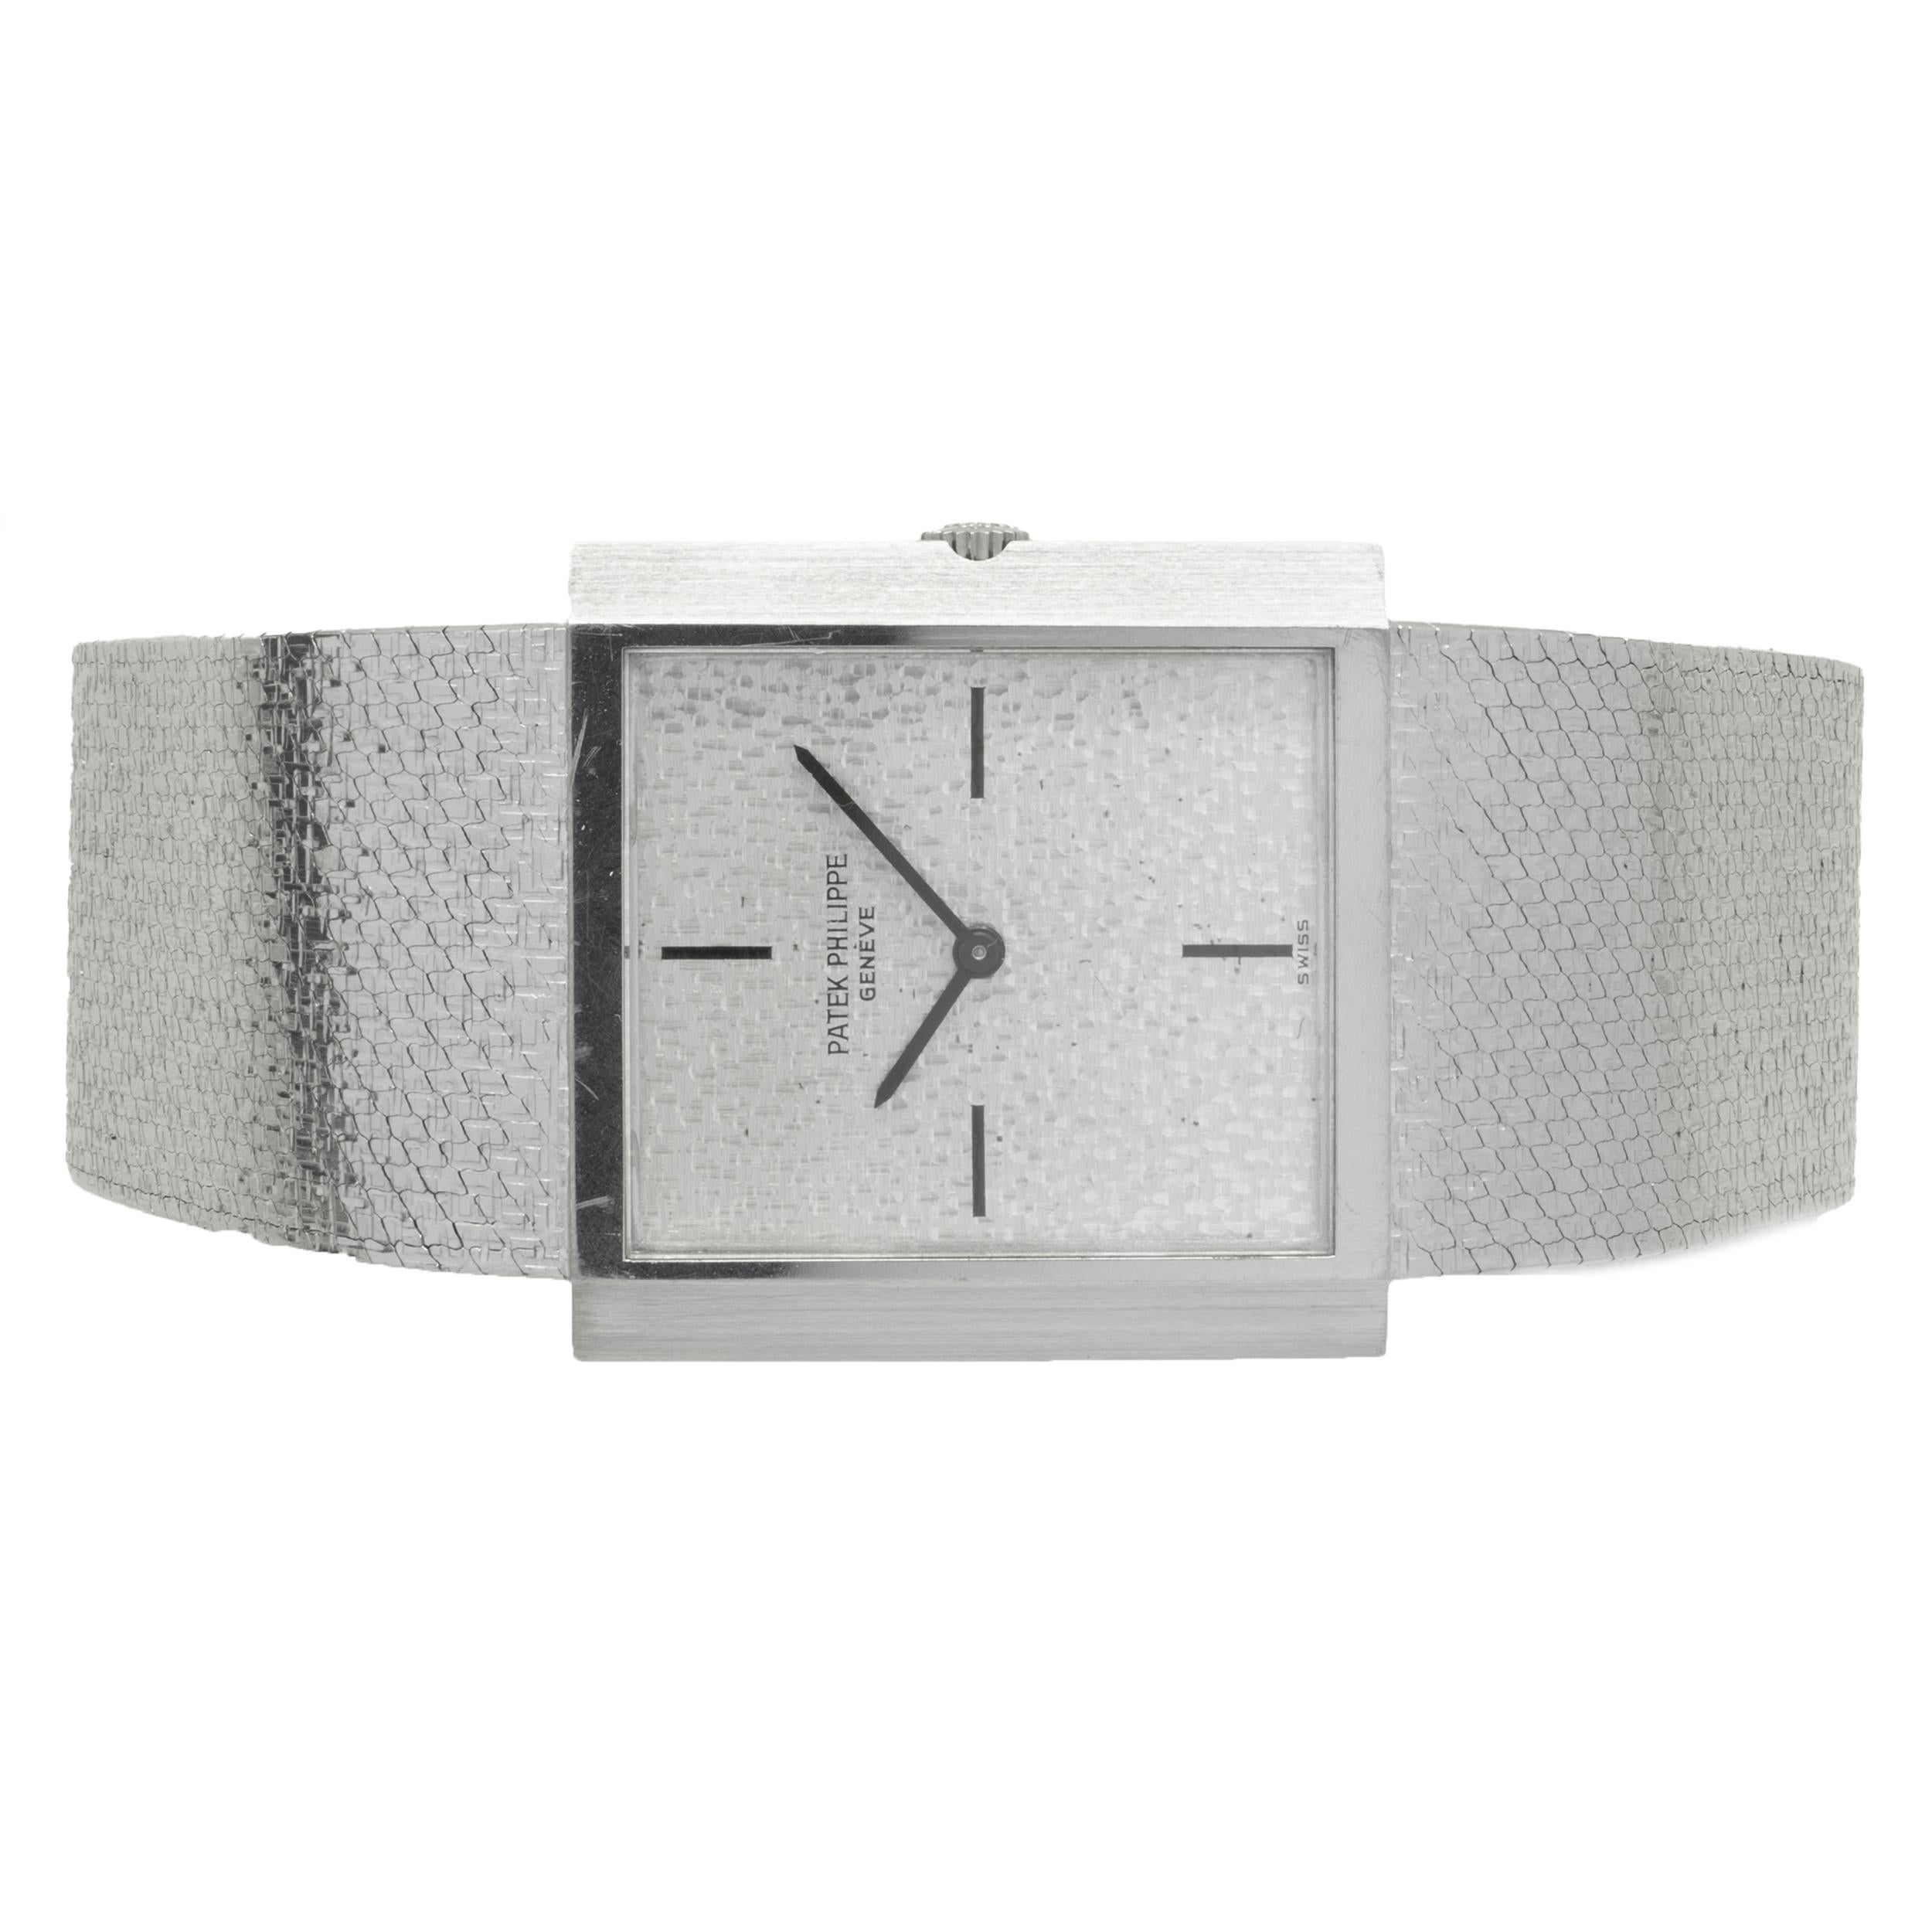 Movement: automatic
Function: hours, minutes
Case: 26 X 26mm 18K white gold square case, sapphire crystal
Dial: silver etched stick dial
Band: Patek Philippe 18K white gold custom mesh style bracelet
Reference #: 3491 / 3
Serial #: